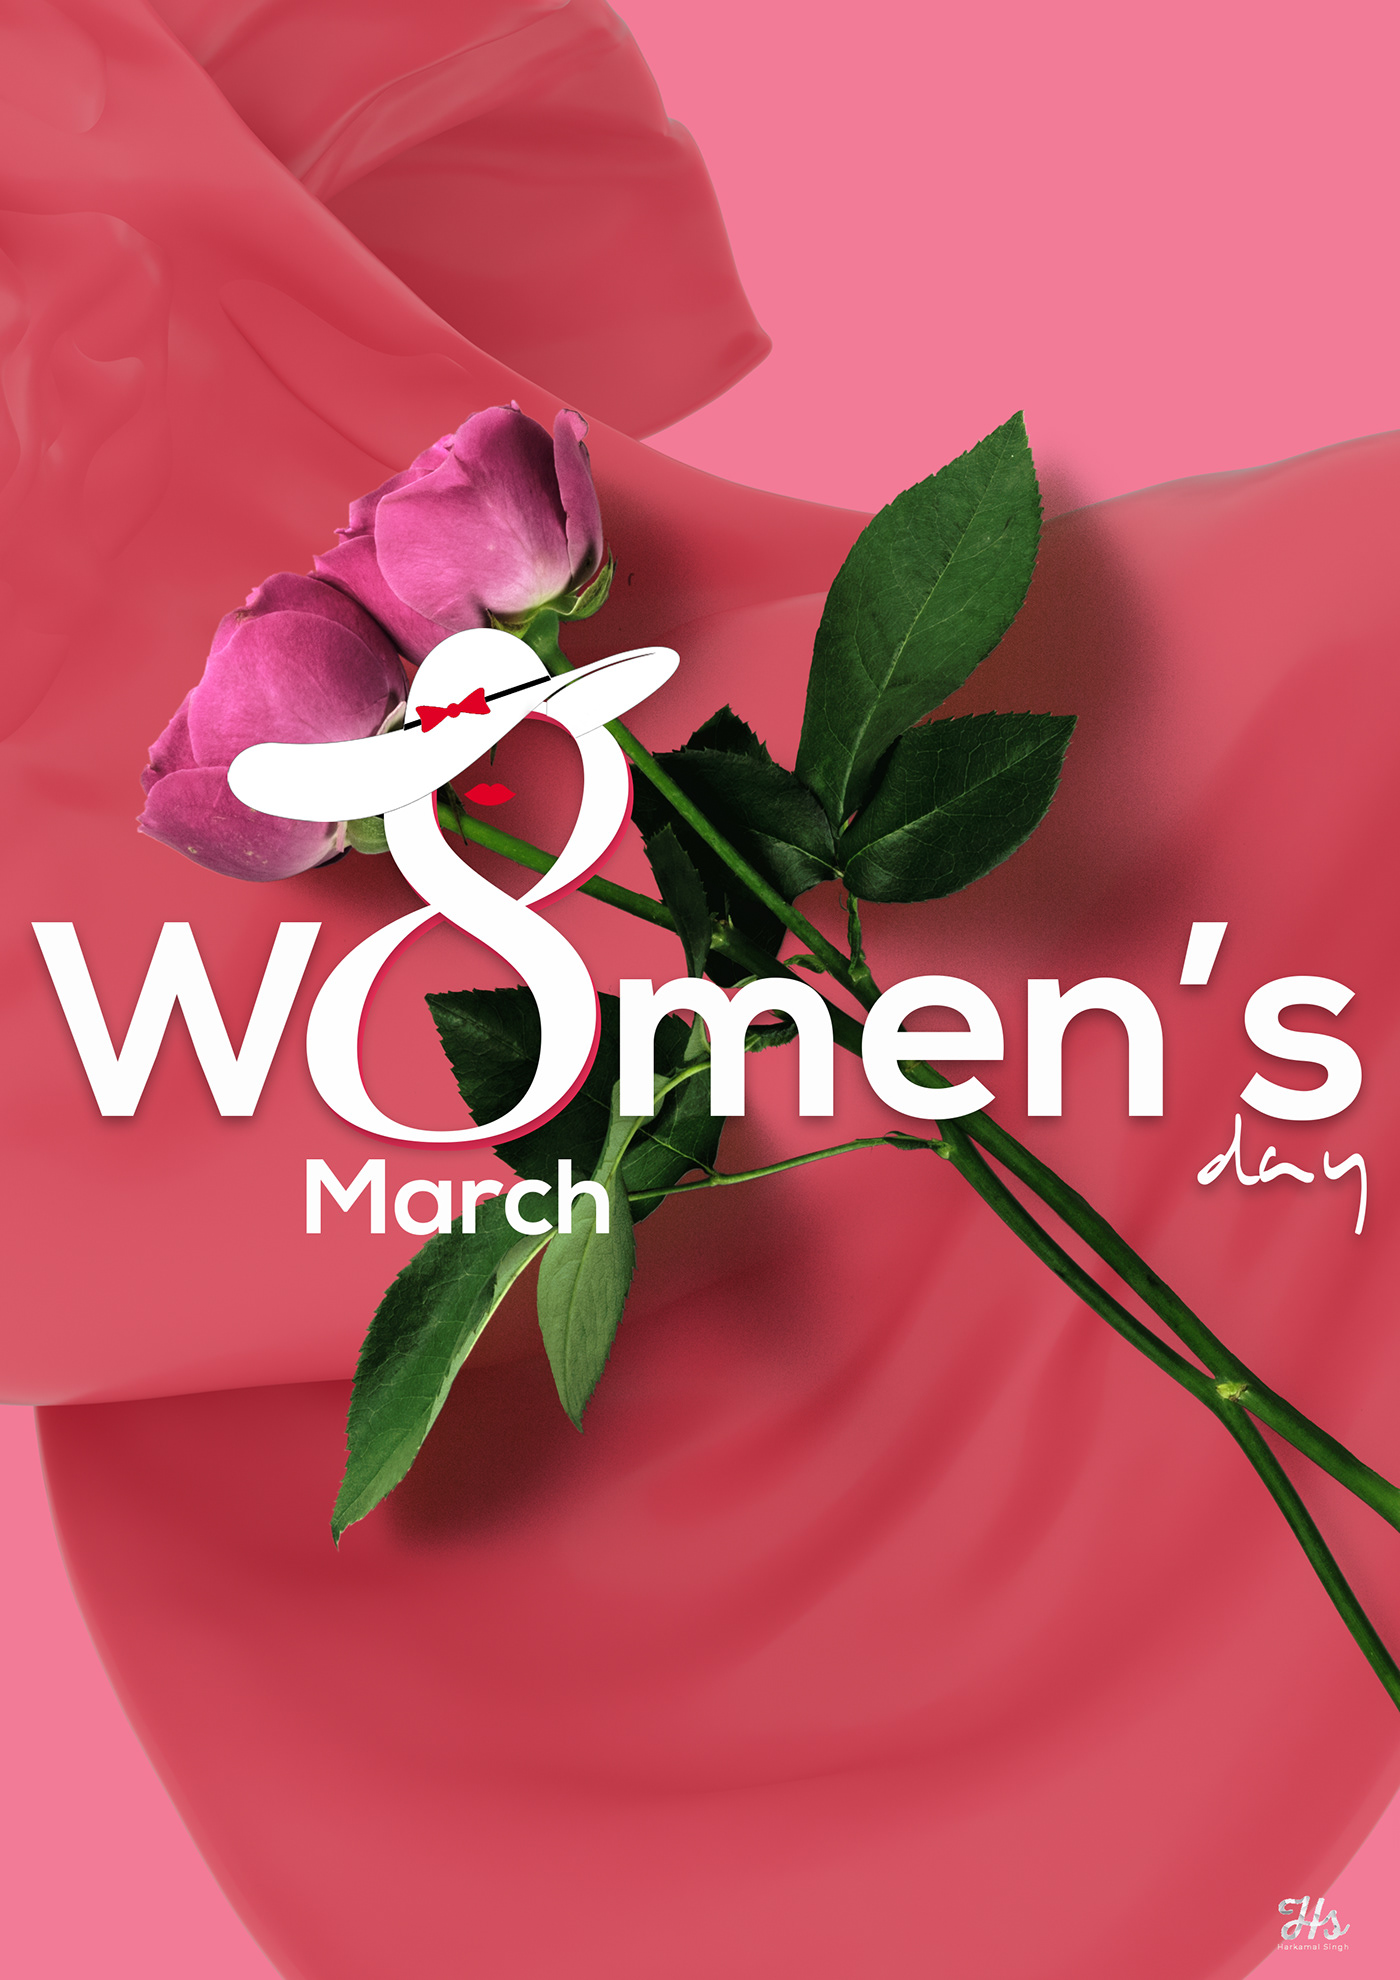 8 march cool creative Fashion  flower pink rose wome women women'sday